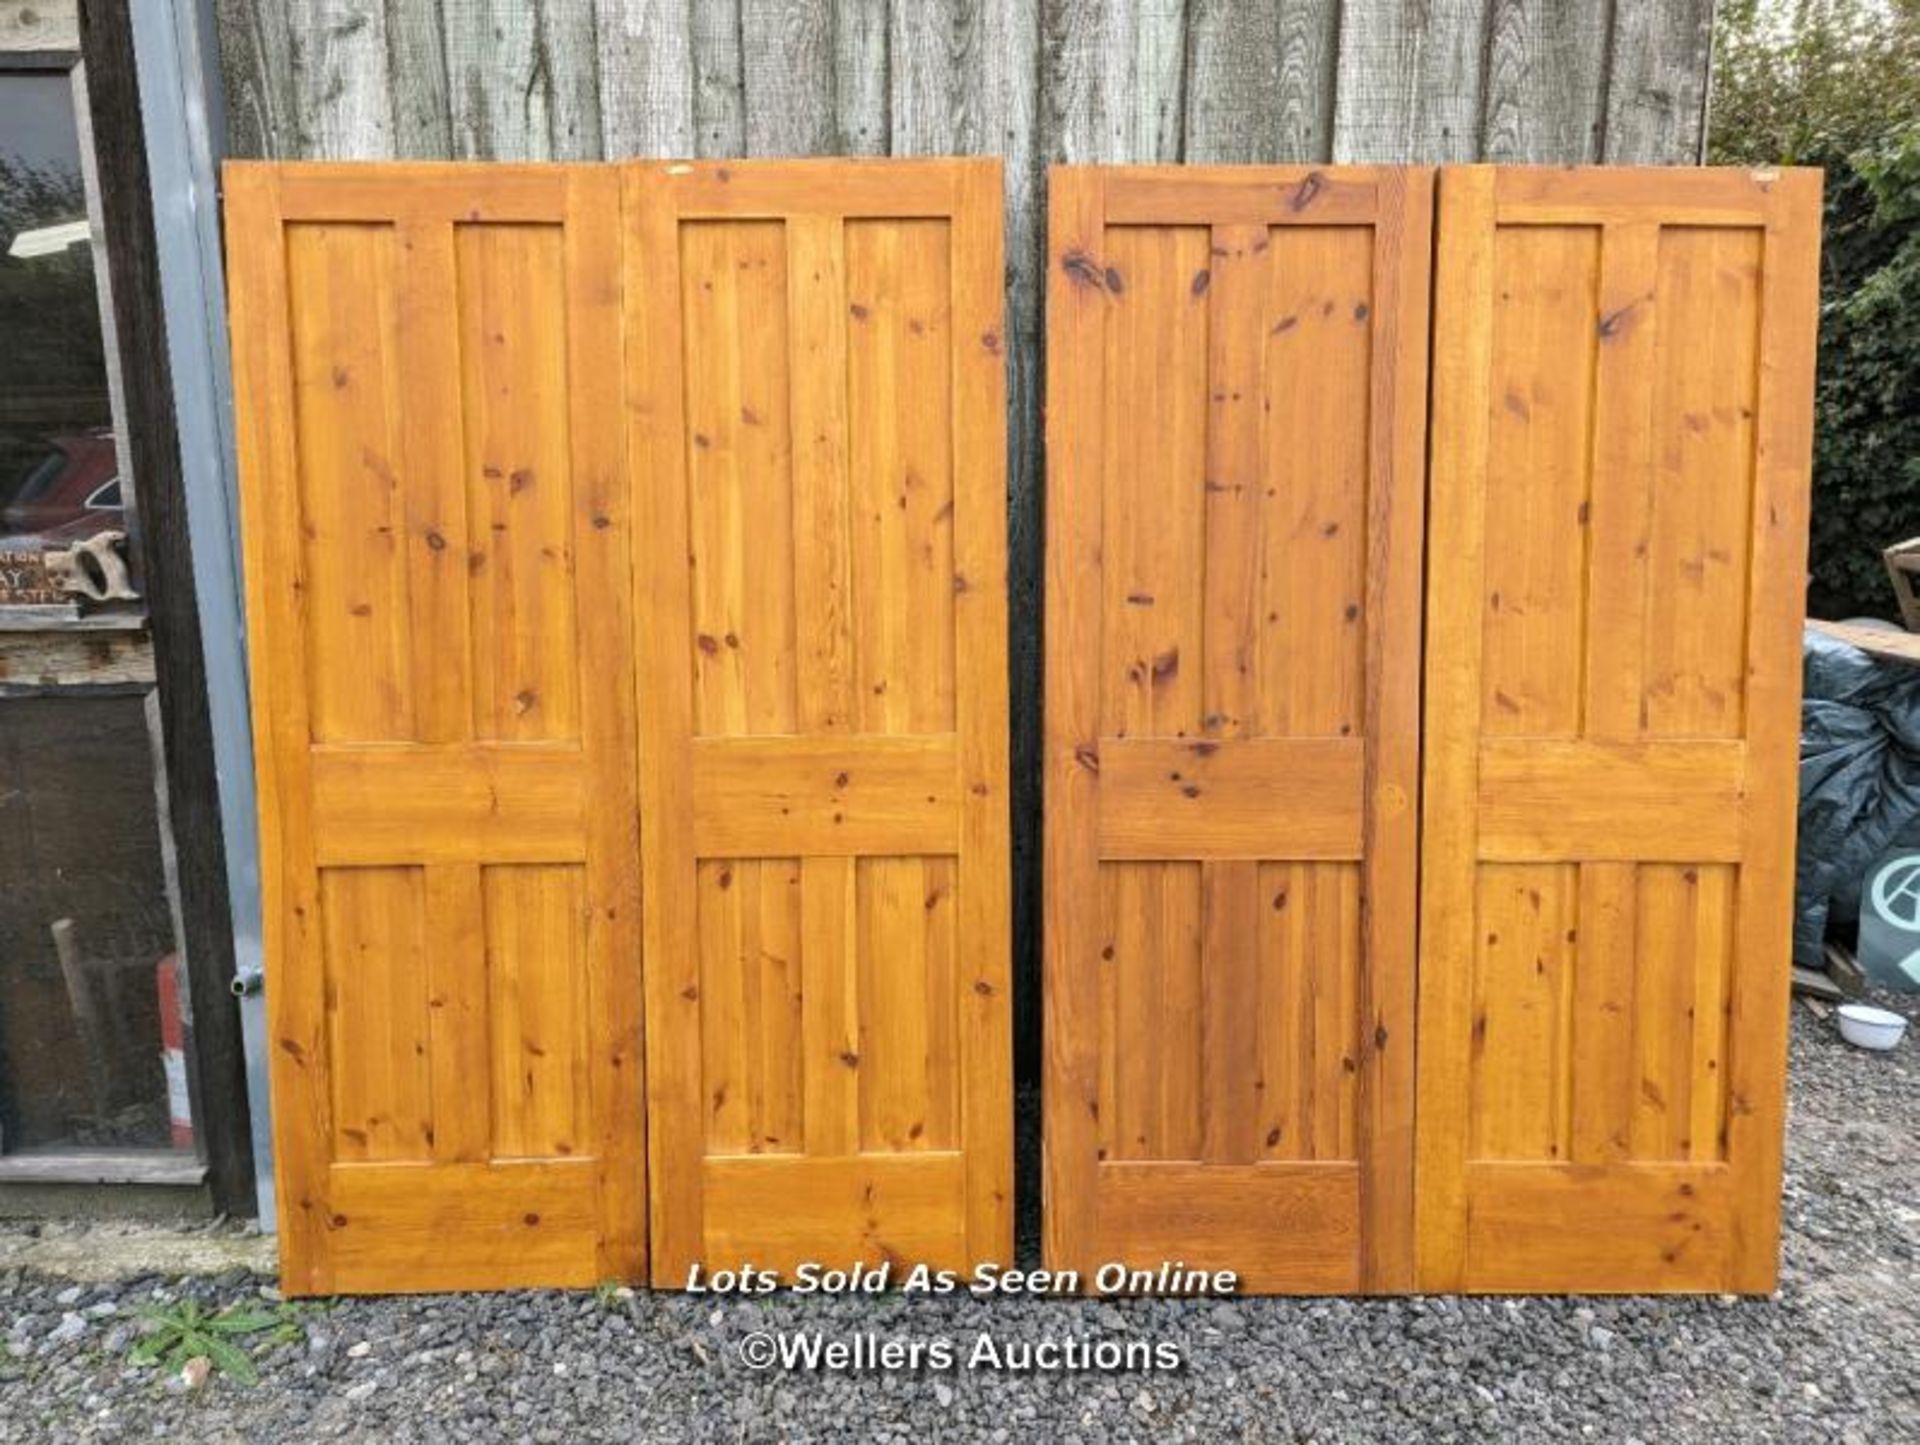 4 matching pine four panel doors, morticed and tenoned construction. Each door 61cm x 183cm x 4cm. - Image 4 of 5